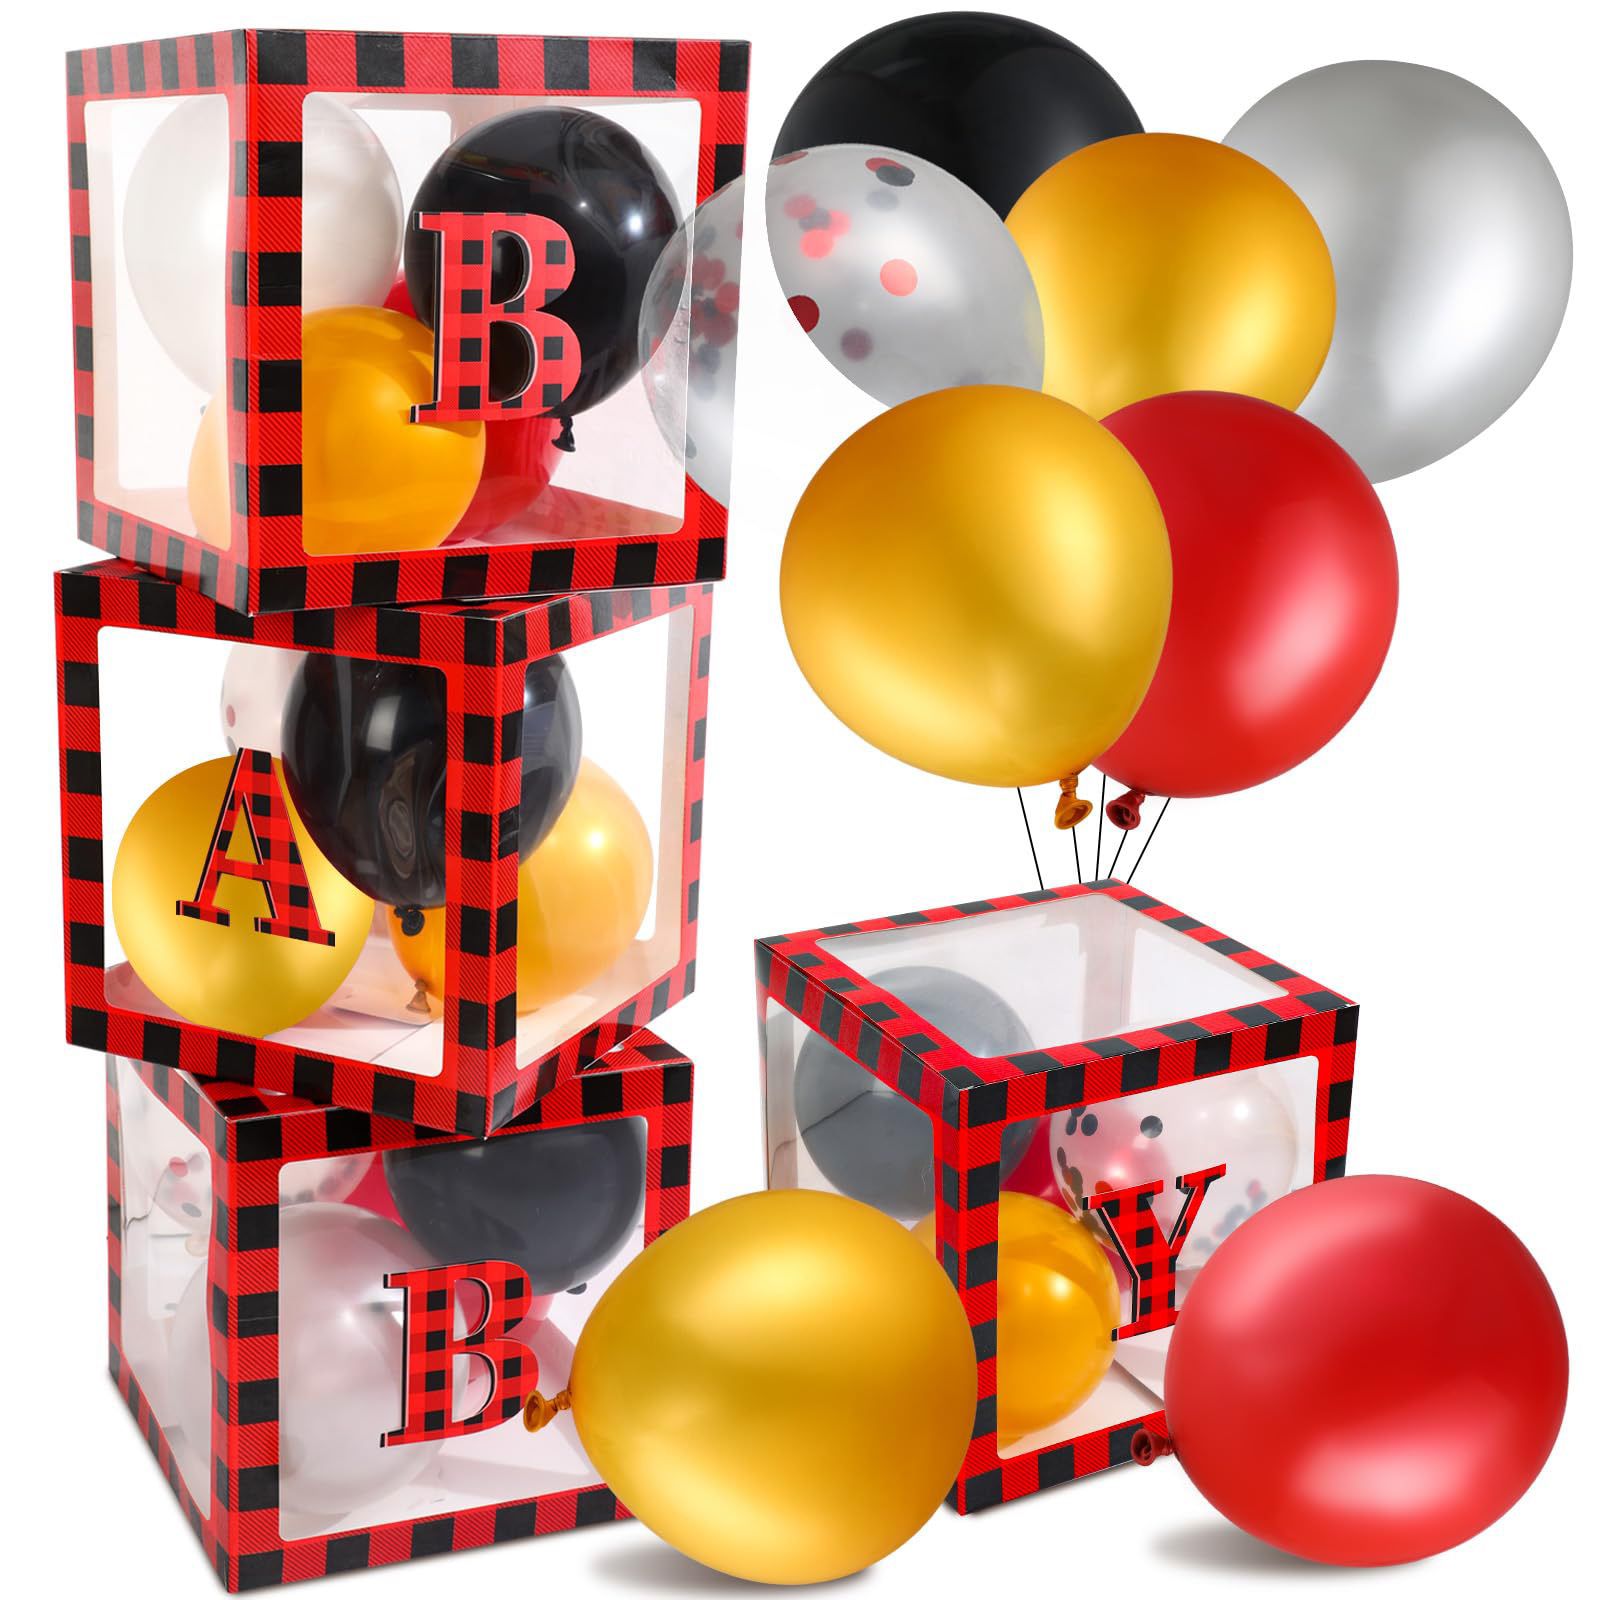 44 Pcs Lumberjack Baby Shower Party Decorations 4 Pcs Red Buffalo Plaid Transparent Balloon Boxes with Baby Letters 40 Pcs 10 Inch Balloons for Lumber